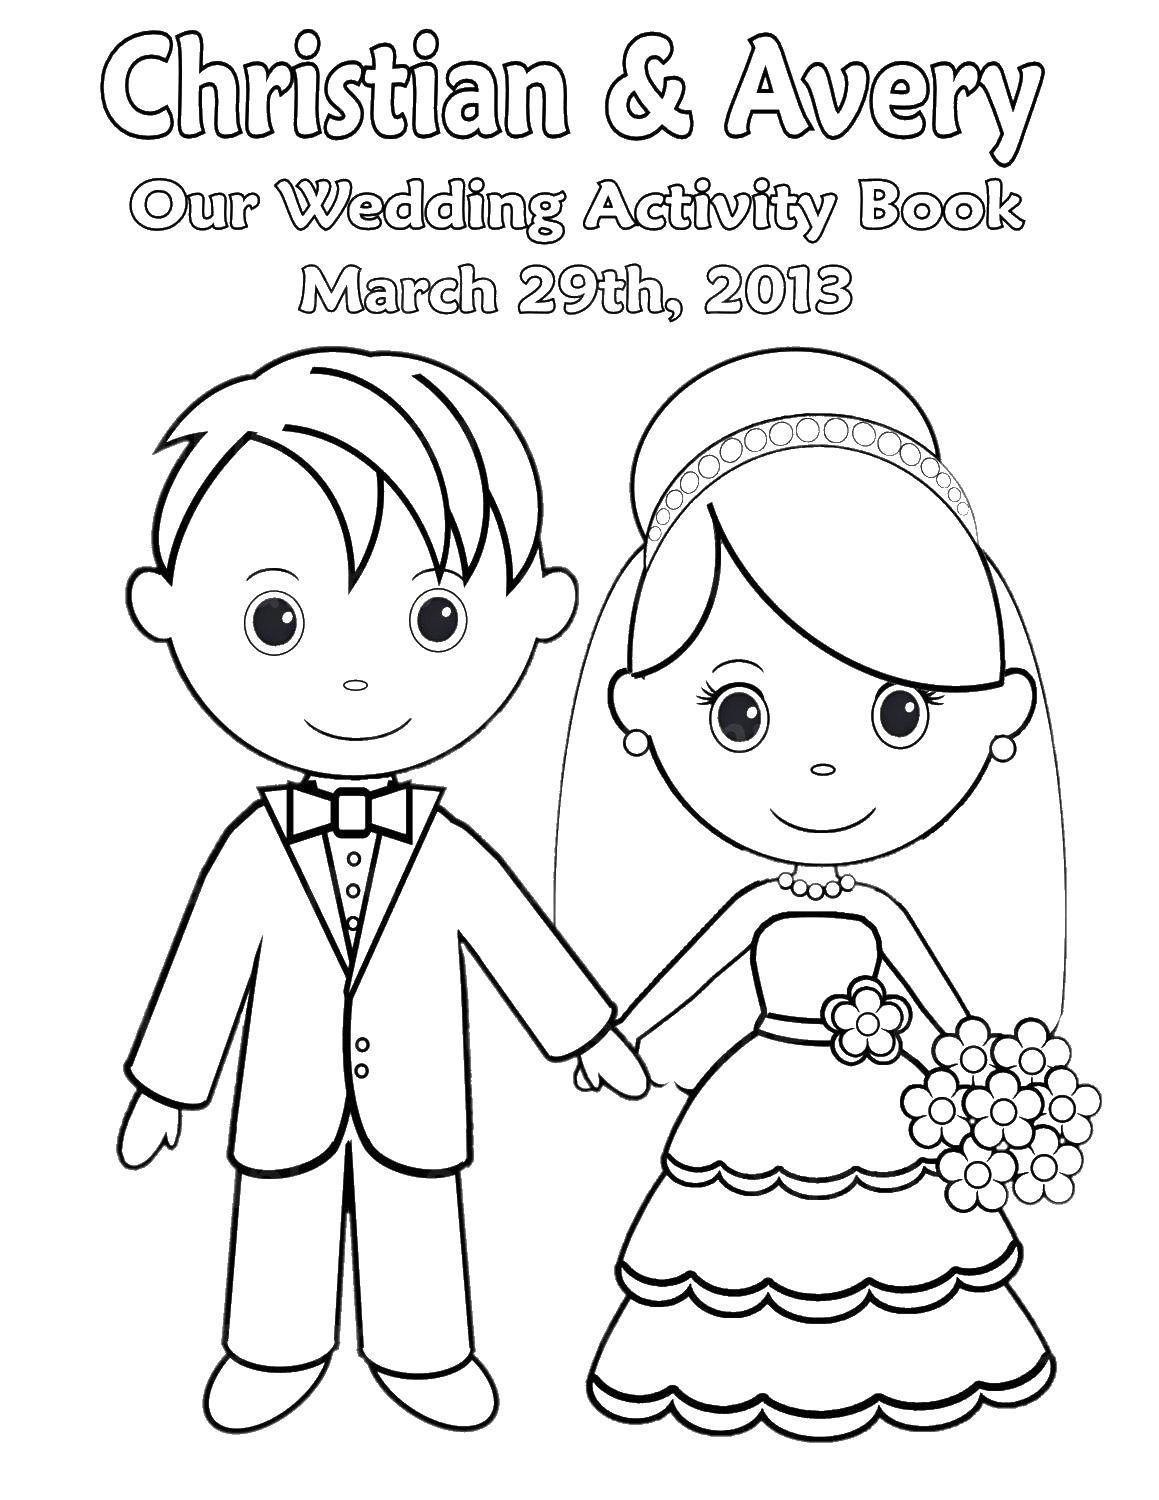 Coloring Christian and Avery. Category Wedding. Tags:  wedding, bride, groom.